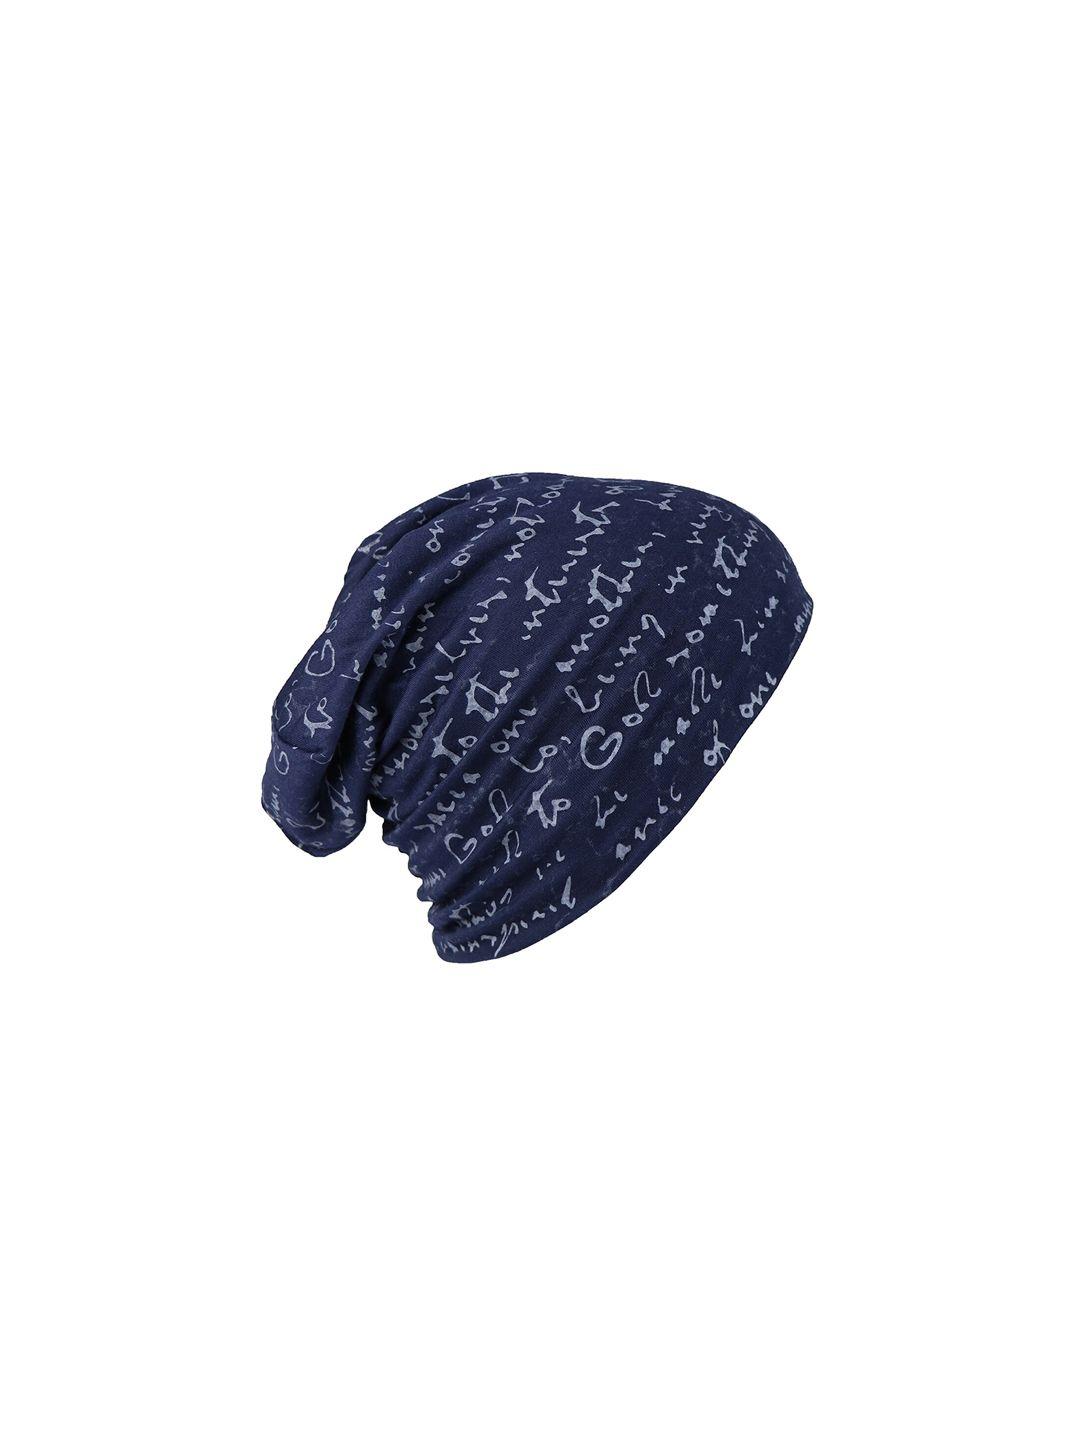 isweven-unisex-navy-blue-&-white-printed-beanie